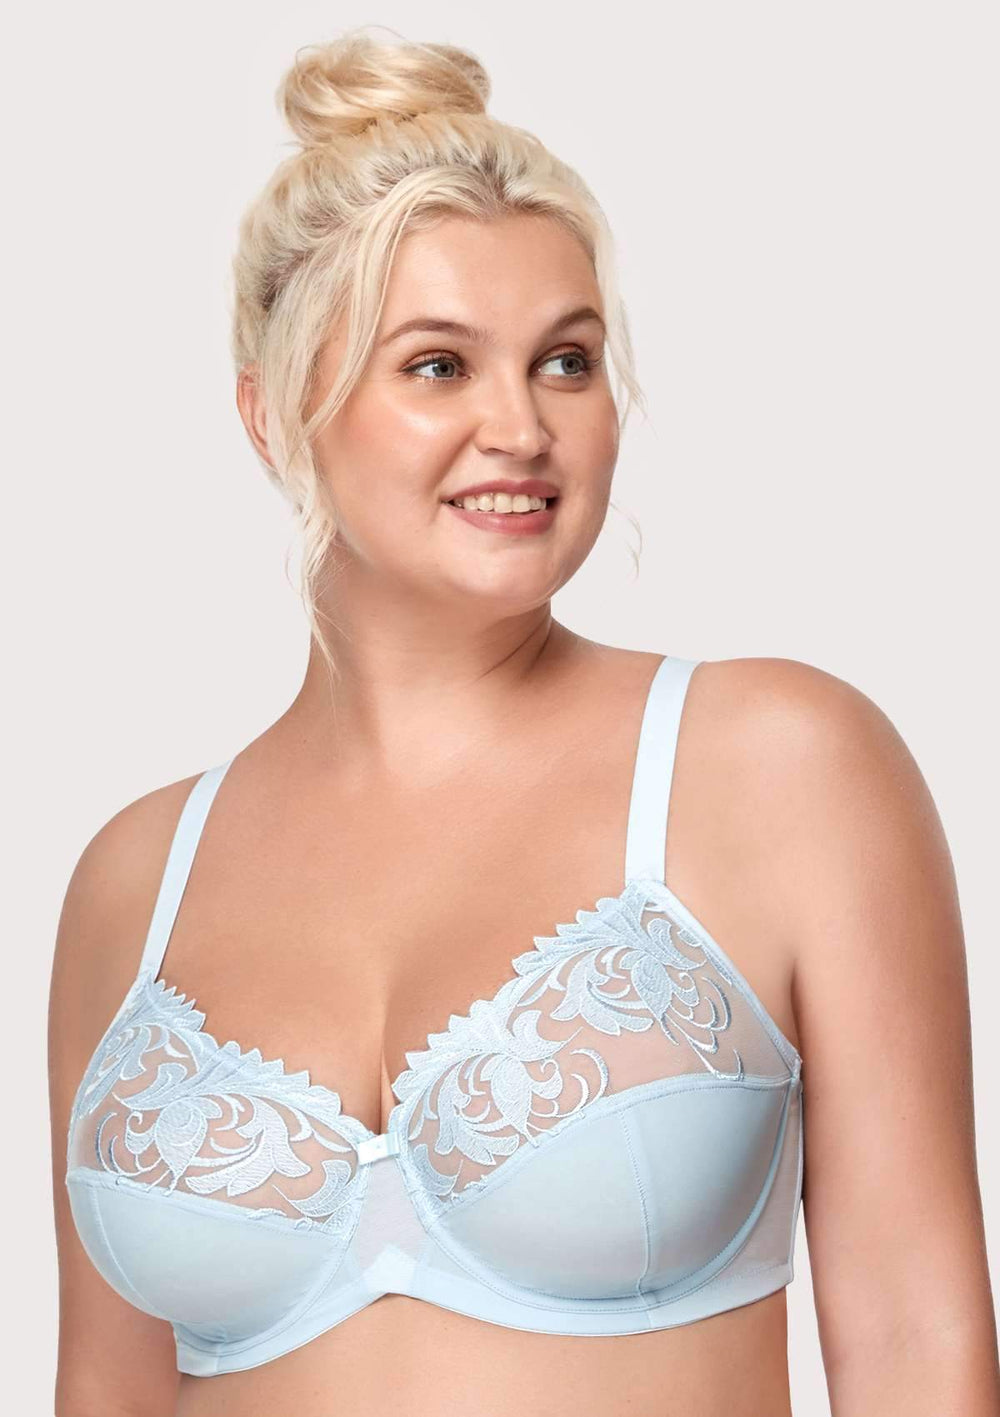 Fuller Figure Embroidered Lace Underwire Bra - Pastel Blue